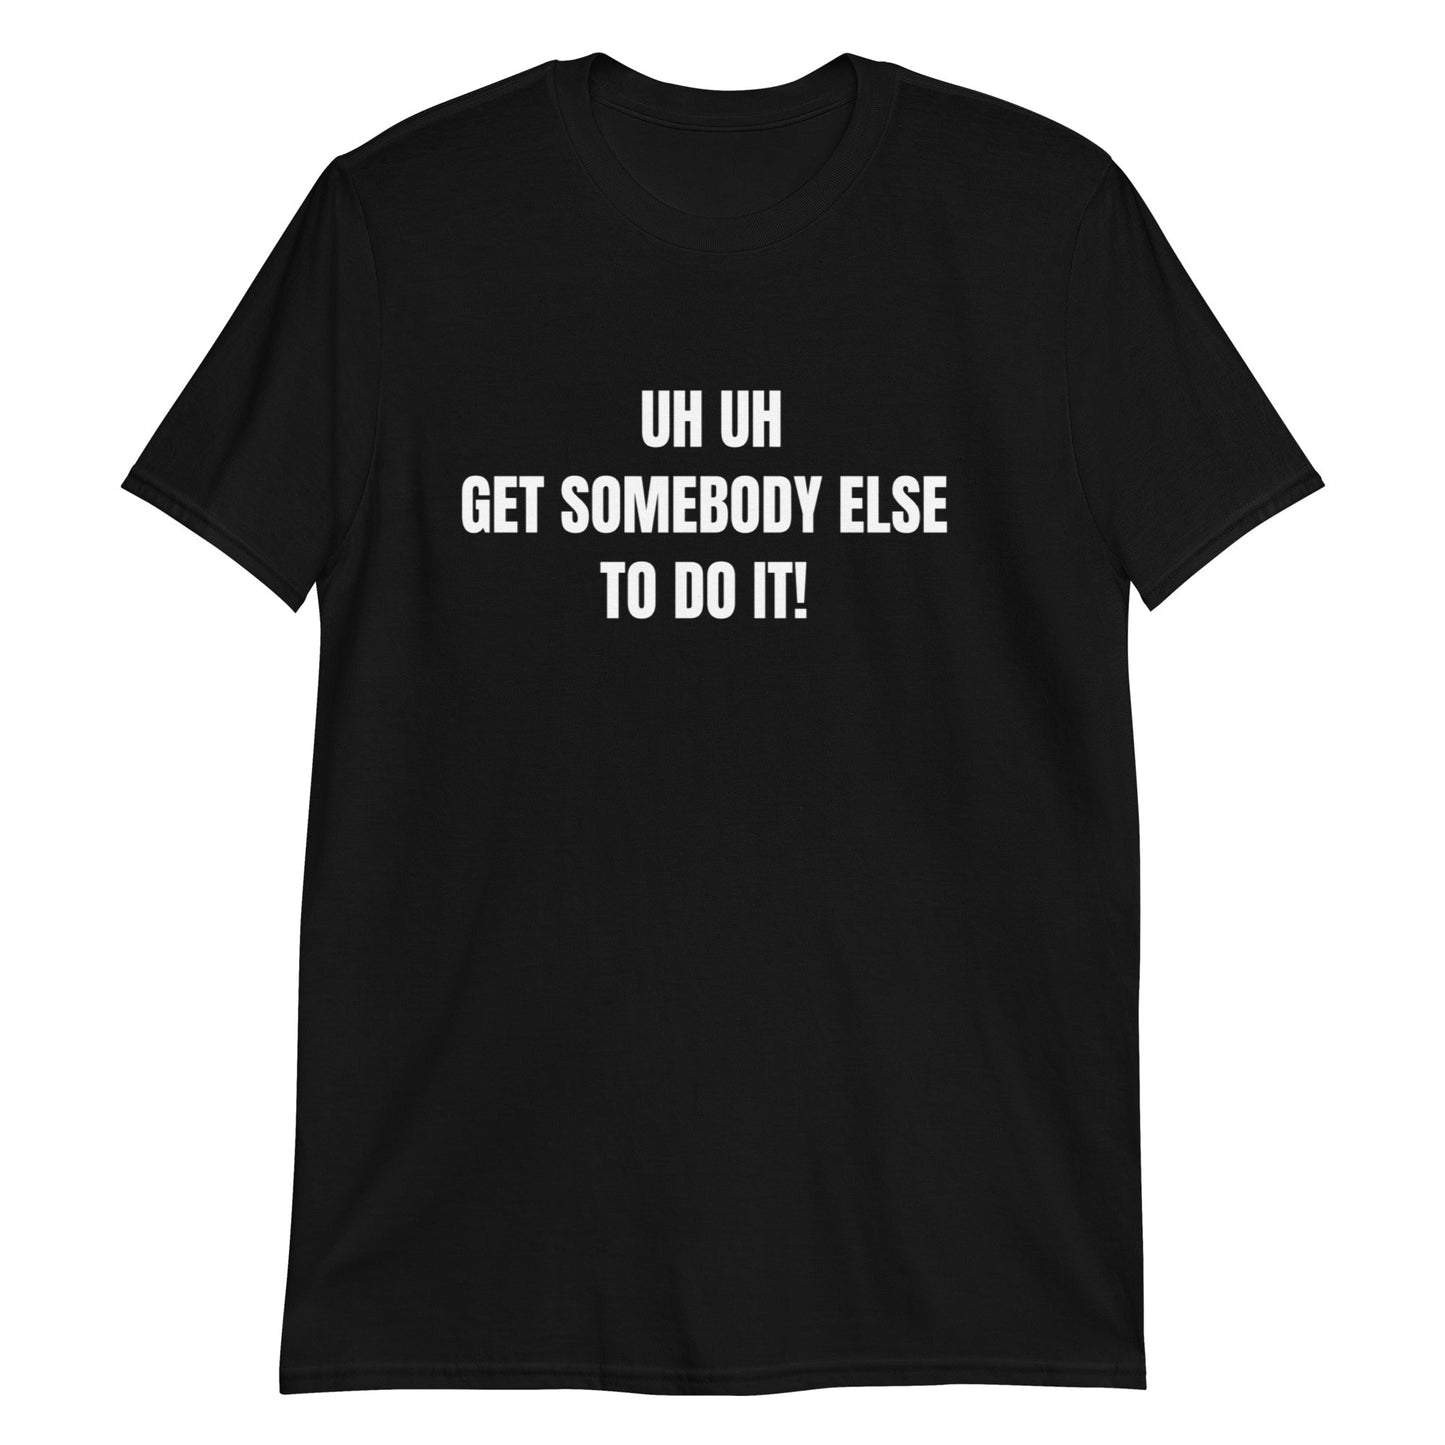 Uh Uh Get Somebody Else To Do It! Short-Sleeve Unisex T-Shirt (For a S ...